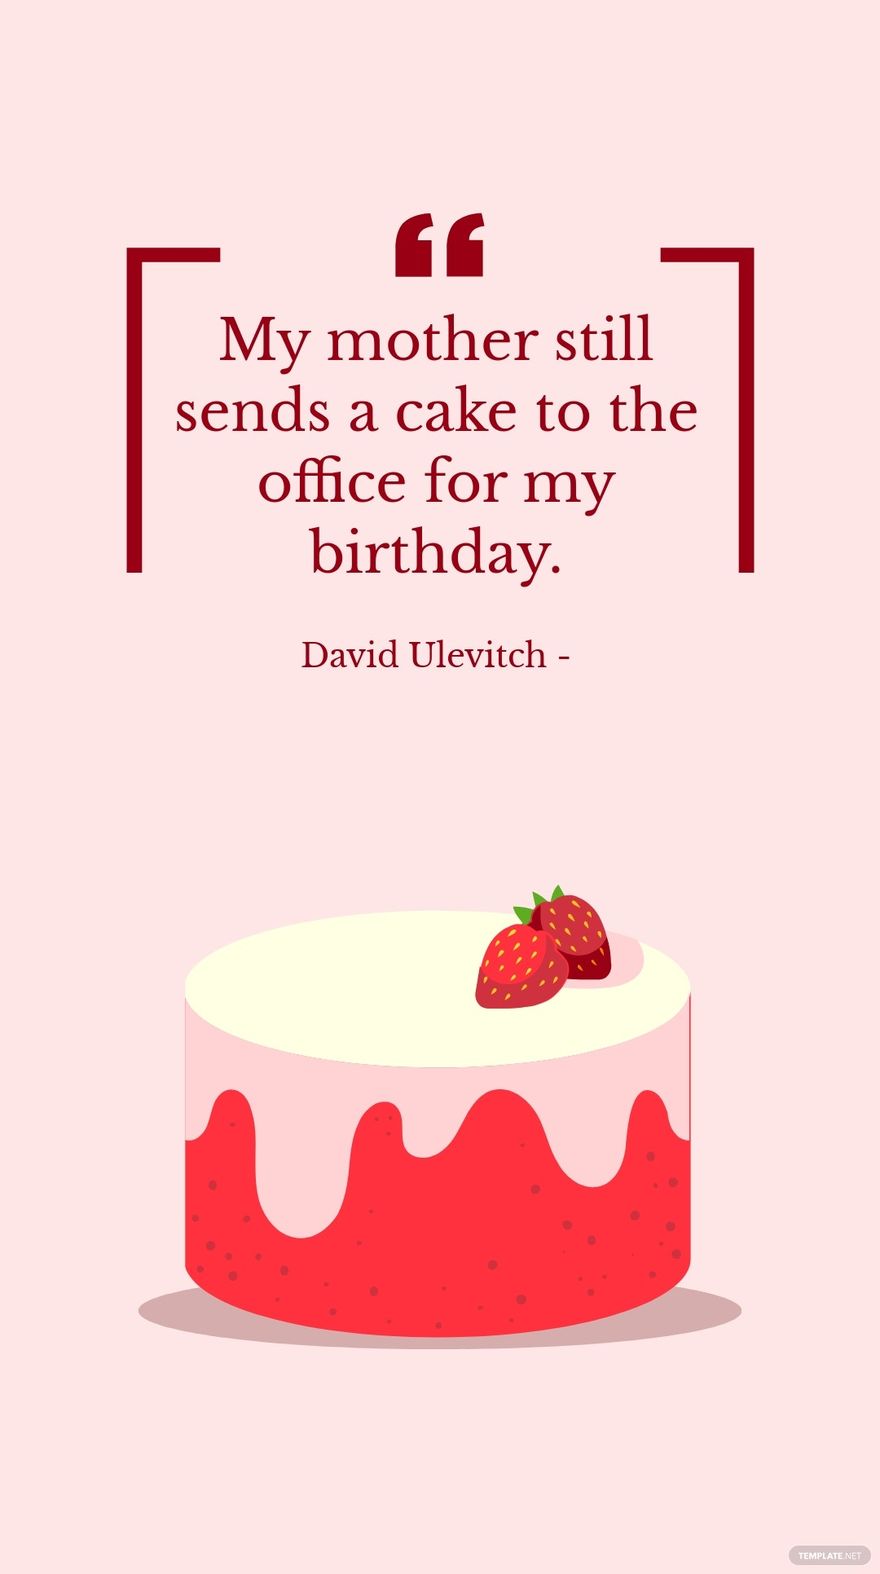 Free David Ulevitch - My mother still sends a cake to the office for my birthday. in JPG